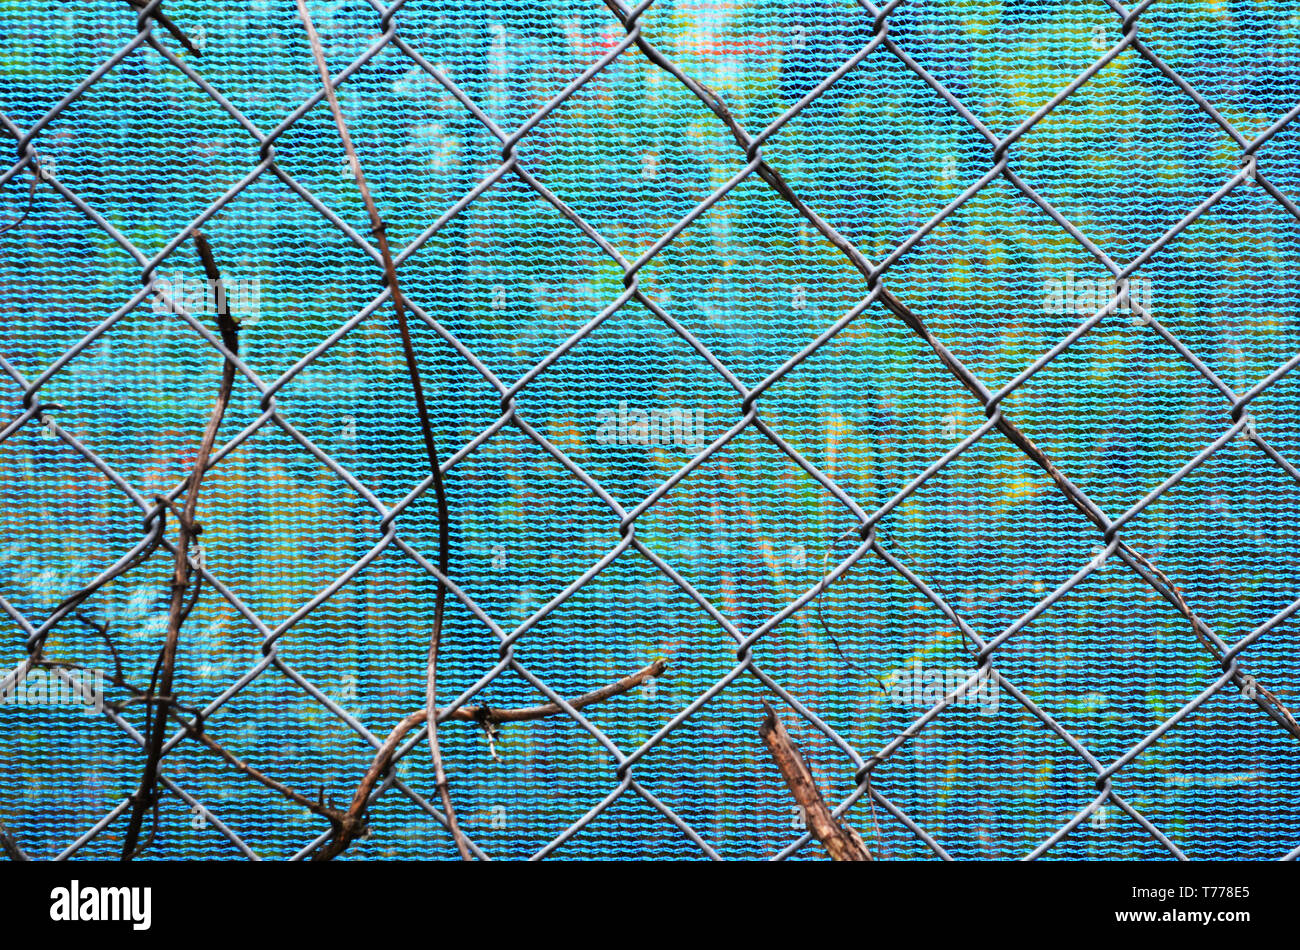 Self-Isolation chain link wire fence background image Stock Photo